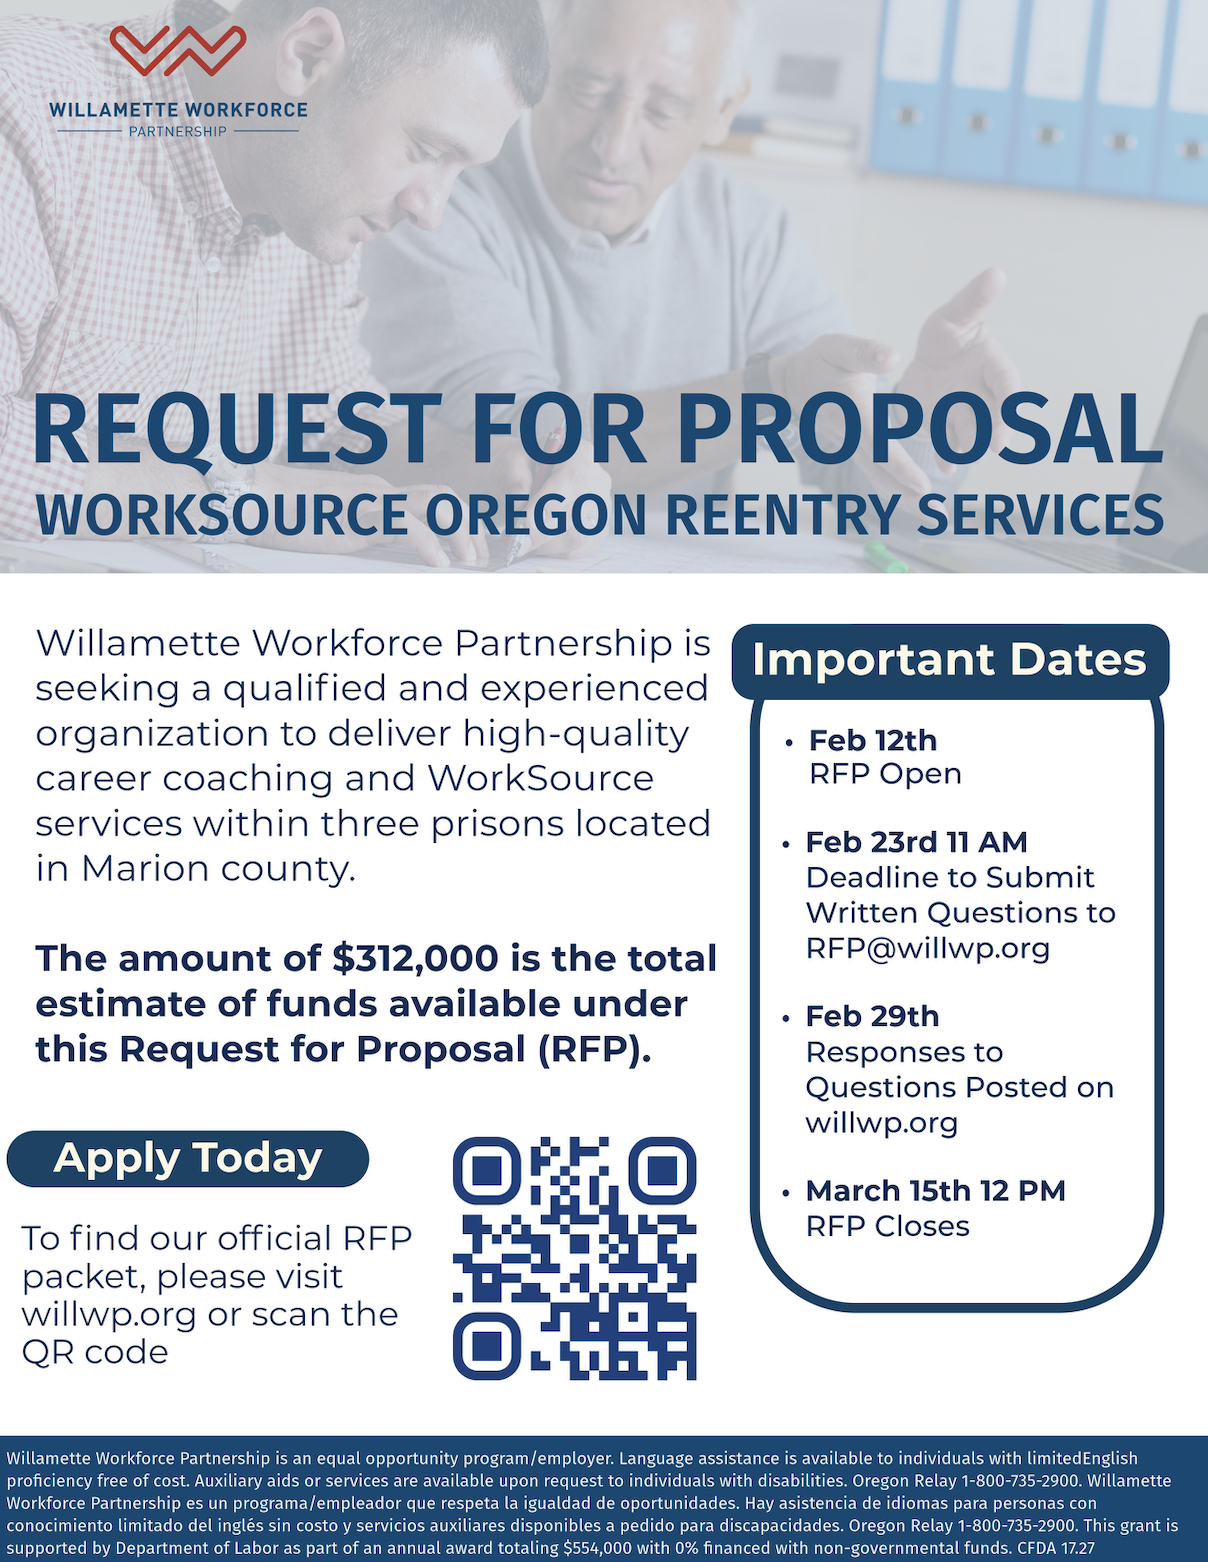 REQUEST FOR PROPOSAL WORKSOURCE OREGON REENTRY SERVICES poster